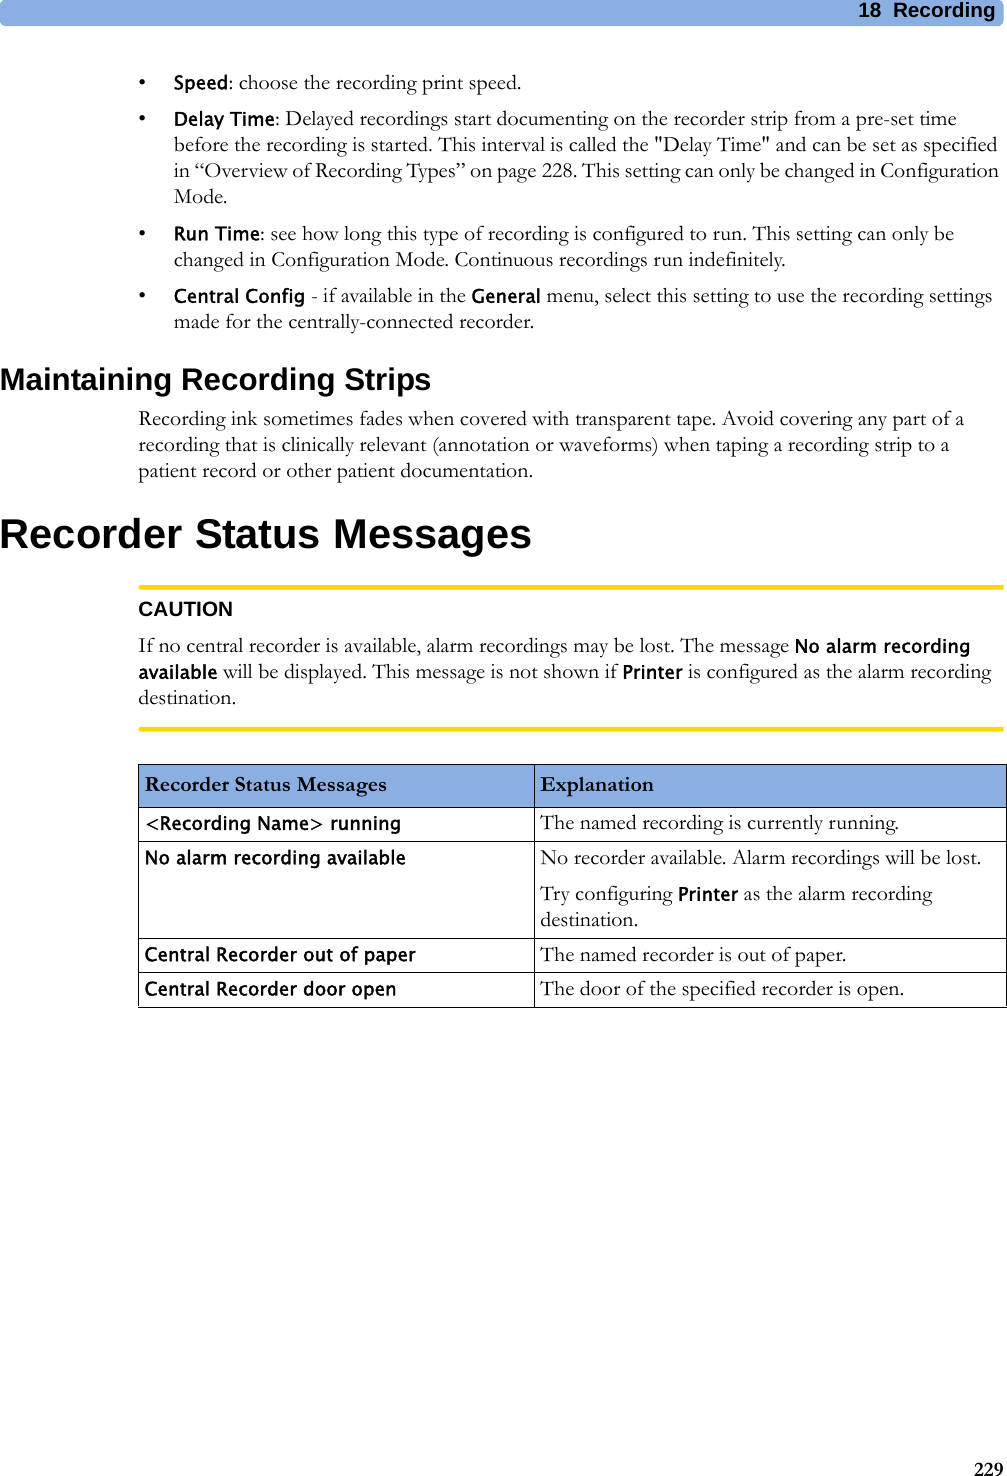 18 Recording229•Speed: choose the recording print speed.•Delay Time: Delayed recordings start documenting on the recorder strip from a pre-set time before the recording is started. This interval is called the &quot;Delay Time&quot; and can be set as specified in “Overview of Recording Types” on page 228. This setting can only be changed in Configuration Mode.•Run Time: see how long this type of recording is configured to run. This setting can only be changed in Configuration Mode. Continuous recordings run indefinitely.•Central Config - if available in the General menu, select this setting to use the recording settings made for the centrally-connected recorder.Maintaining Recording StripsRecording ink sometimes fades when covered with transparent tape. Avoid covering any part of a recording that is clinically relevant (annotation or waveforms) when taping a recording strip to a patient record or other patient documentation.Recorder Status MessagesCAUTIONIf no central recorder is available, alarm recordings may be lost. The message No alarm recording available will be displayed. This message is not shown if Printer is configured as the alarm recording destination.Recorder Status Messages Explanation&lt;Recording Name&gt; running The named recording is currently running.No alarm recording available No recorder available. Alarm recordings will be lost.Try configuring Printer as the alarm recording destination.Central Recorder out of paper The named recorder is out of paper.Central Recorder door open The door of the specified recorder is open.